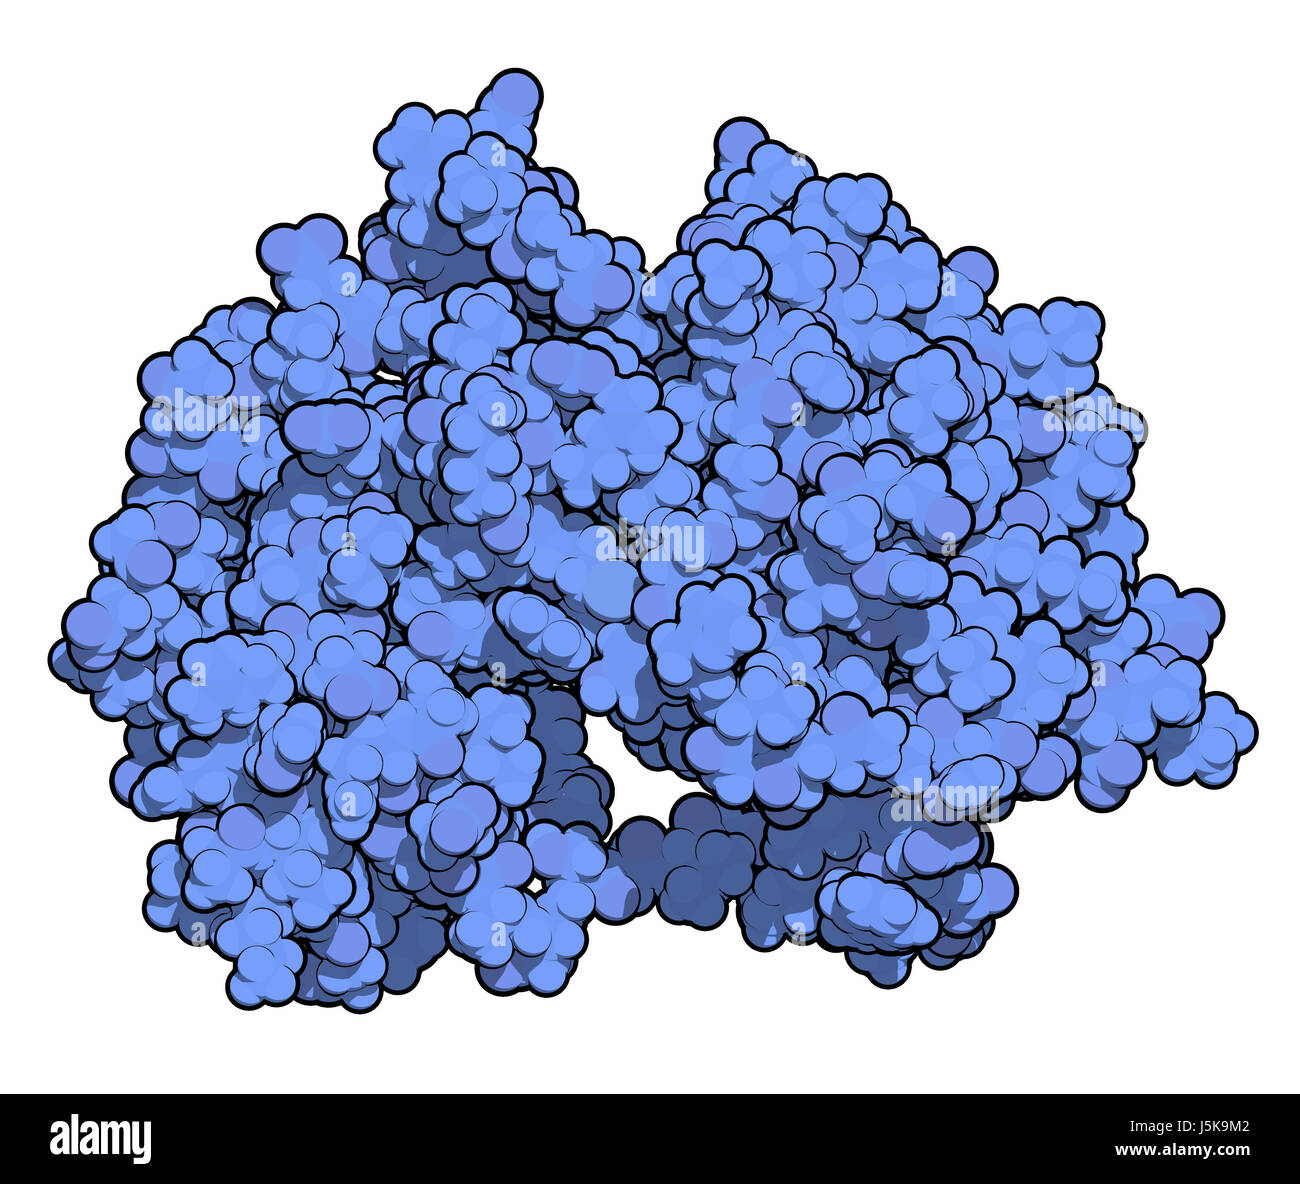 MEK1 or mitogen-activated protein kinase kinase 1 (rabbit) protein. MEK inhibitors are used in treatment of cancer and includes cobimetinib. Stock Photo